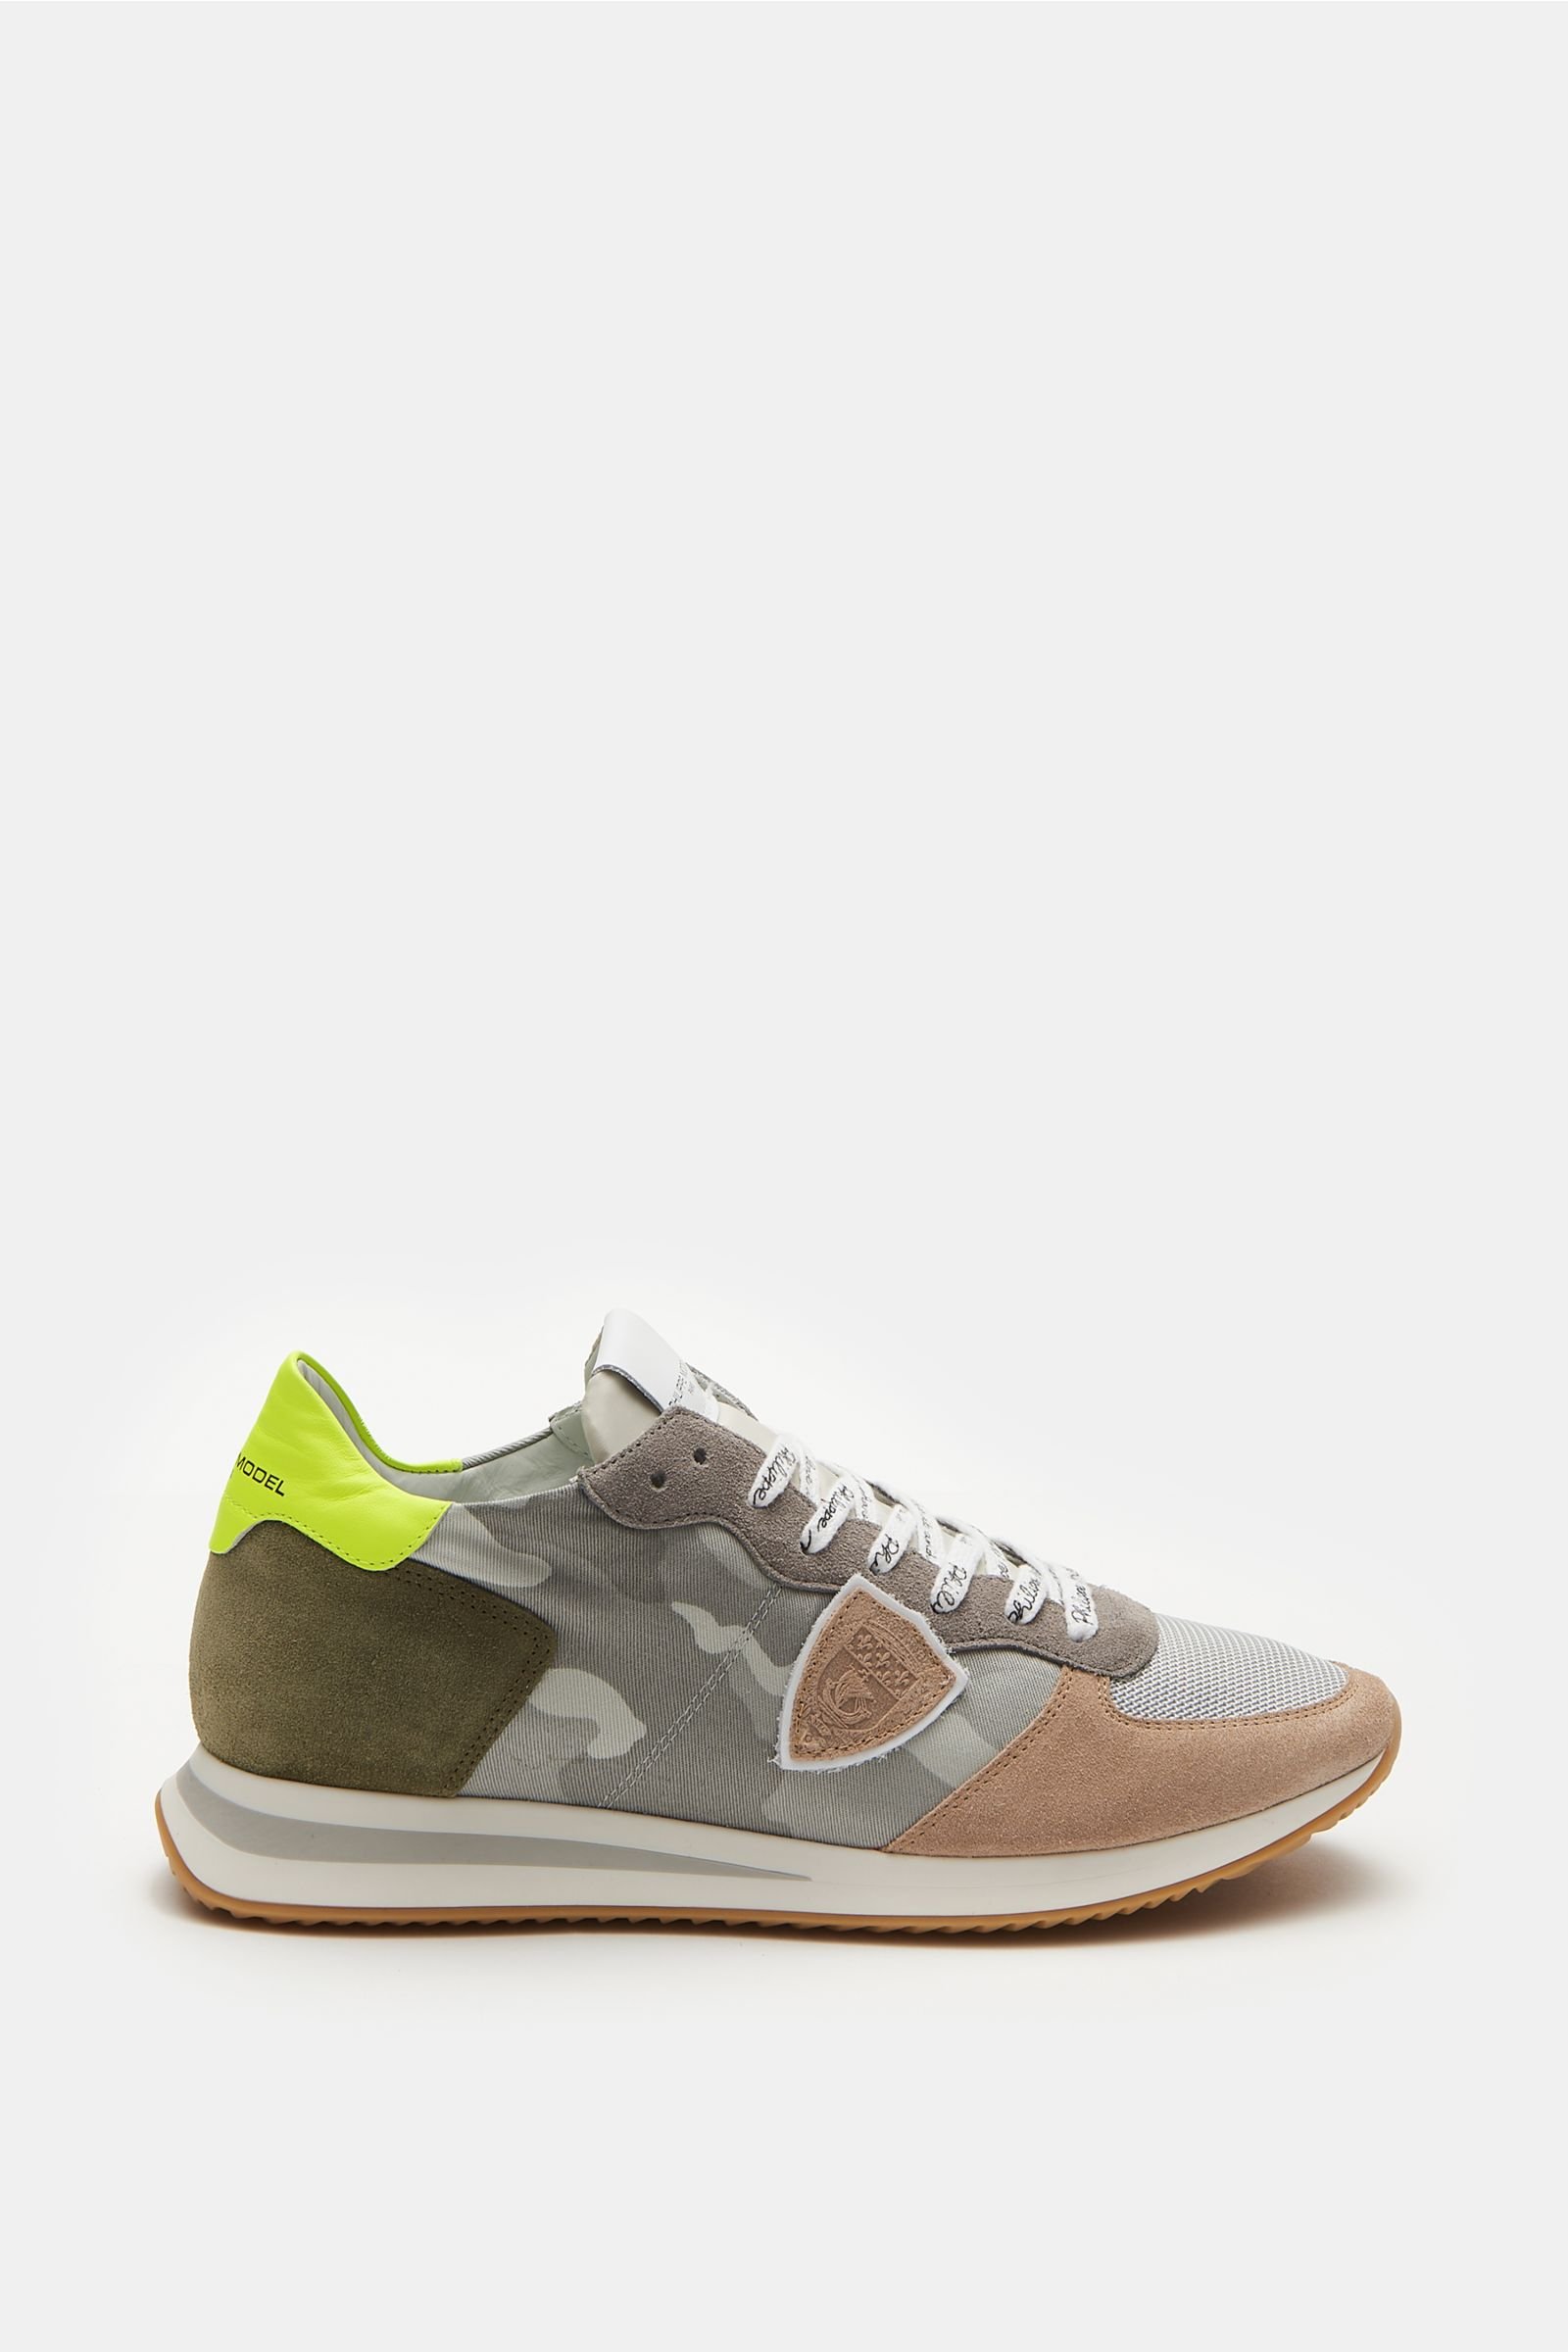 Sneakers 'Trpx Camouflage' grey/light brown patterned